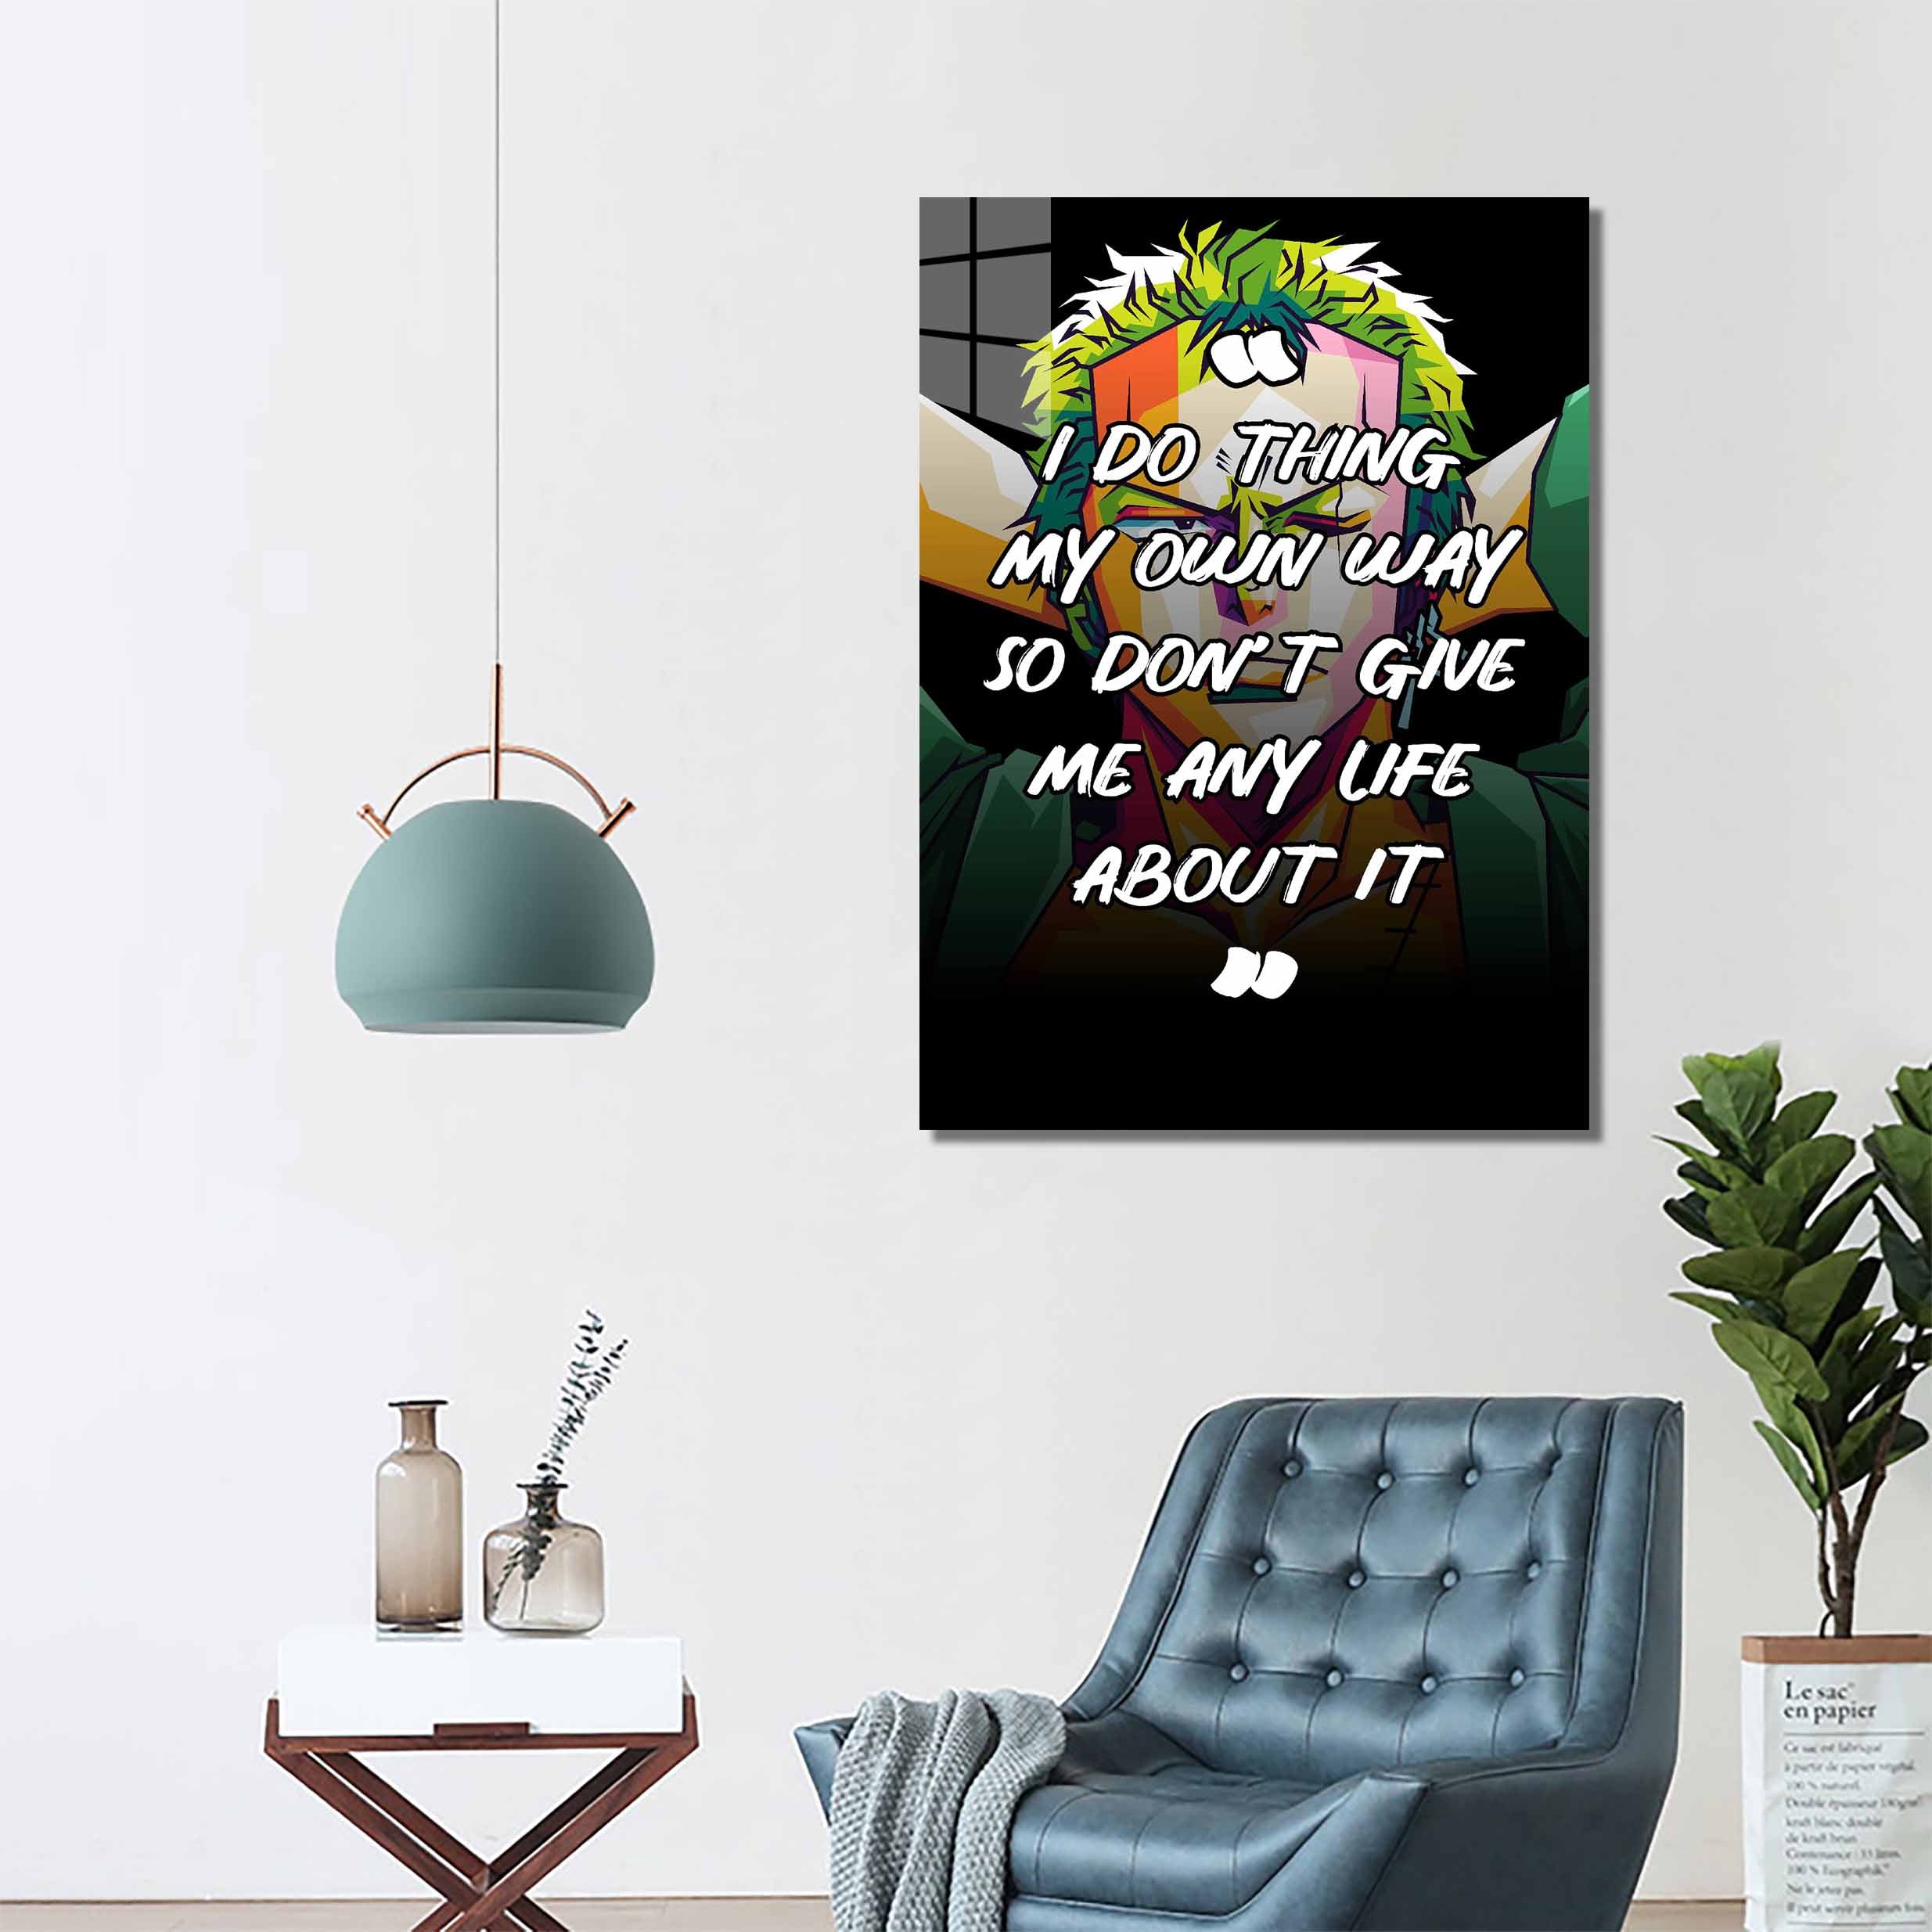 Quotes zoro-designed by @Doublede Design